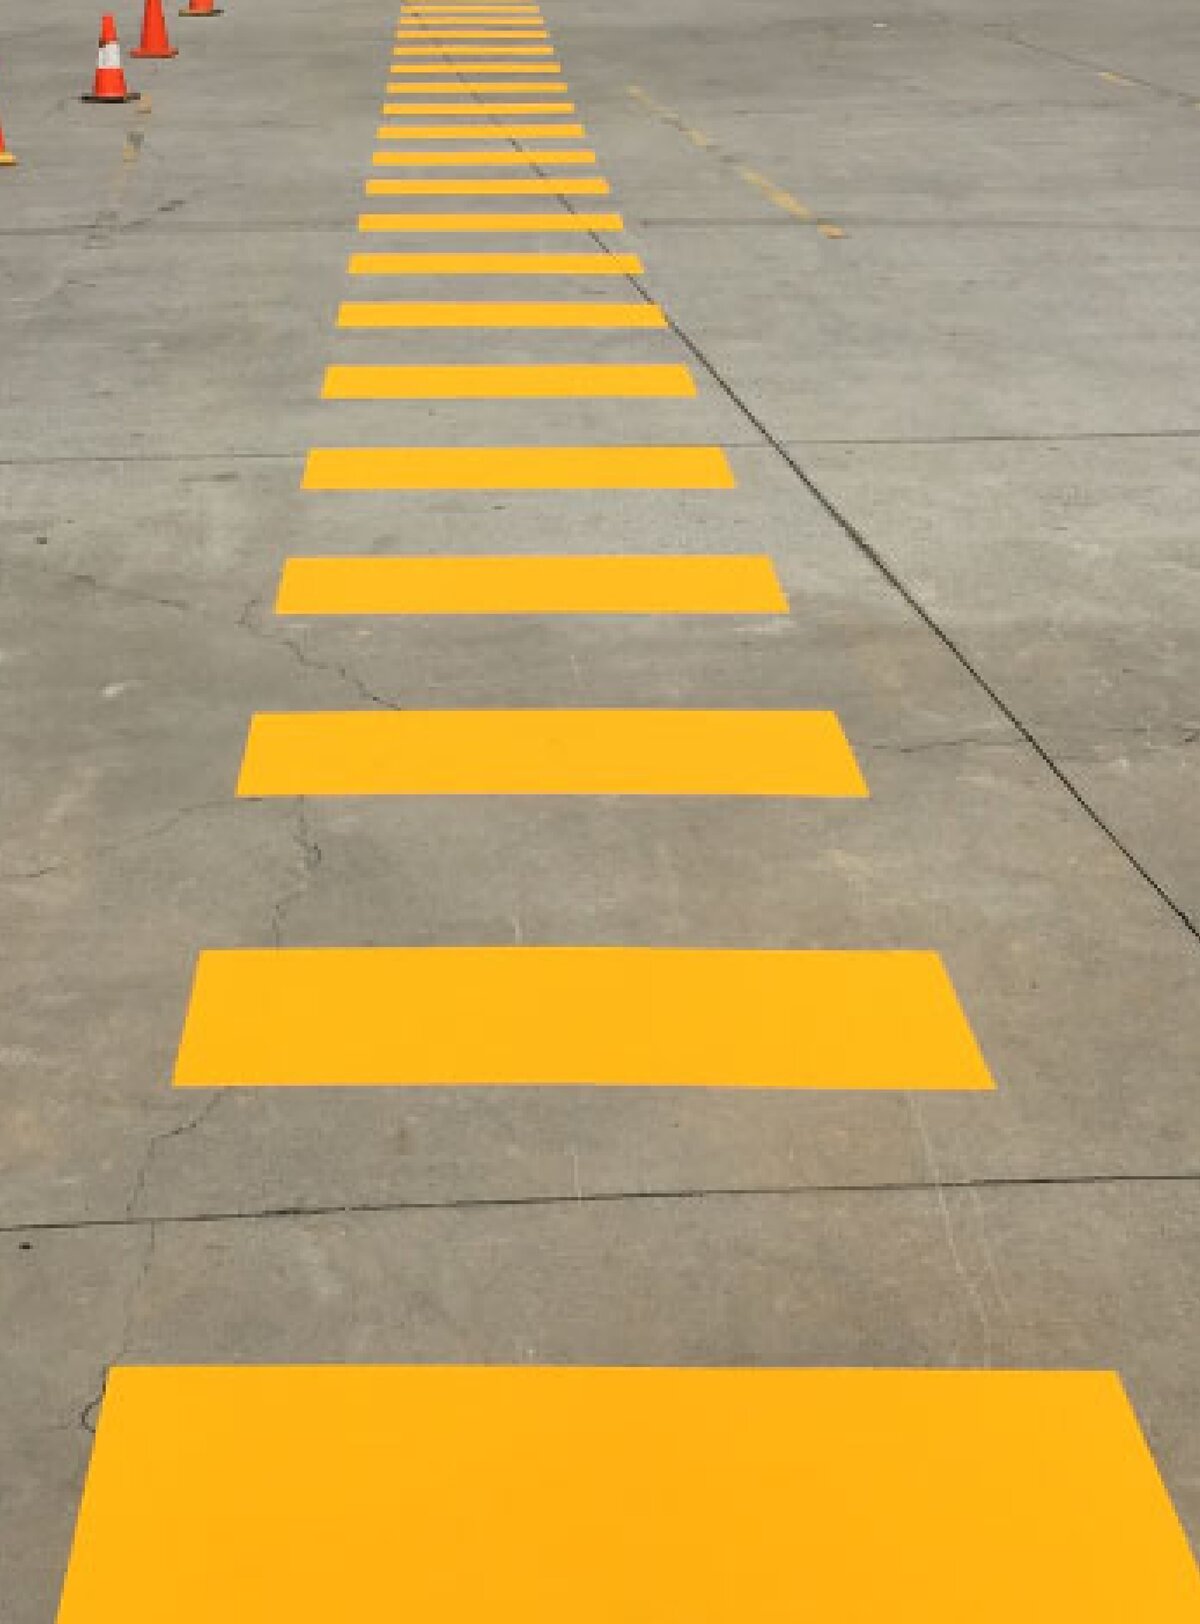 A painted yellow line marking for pedestrian walkways on a concrete carpark with orange safety cones.